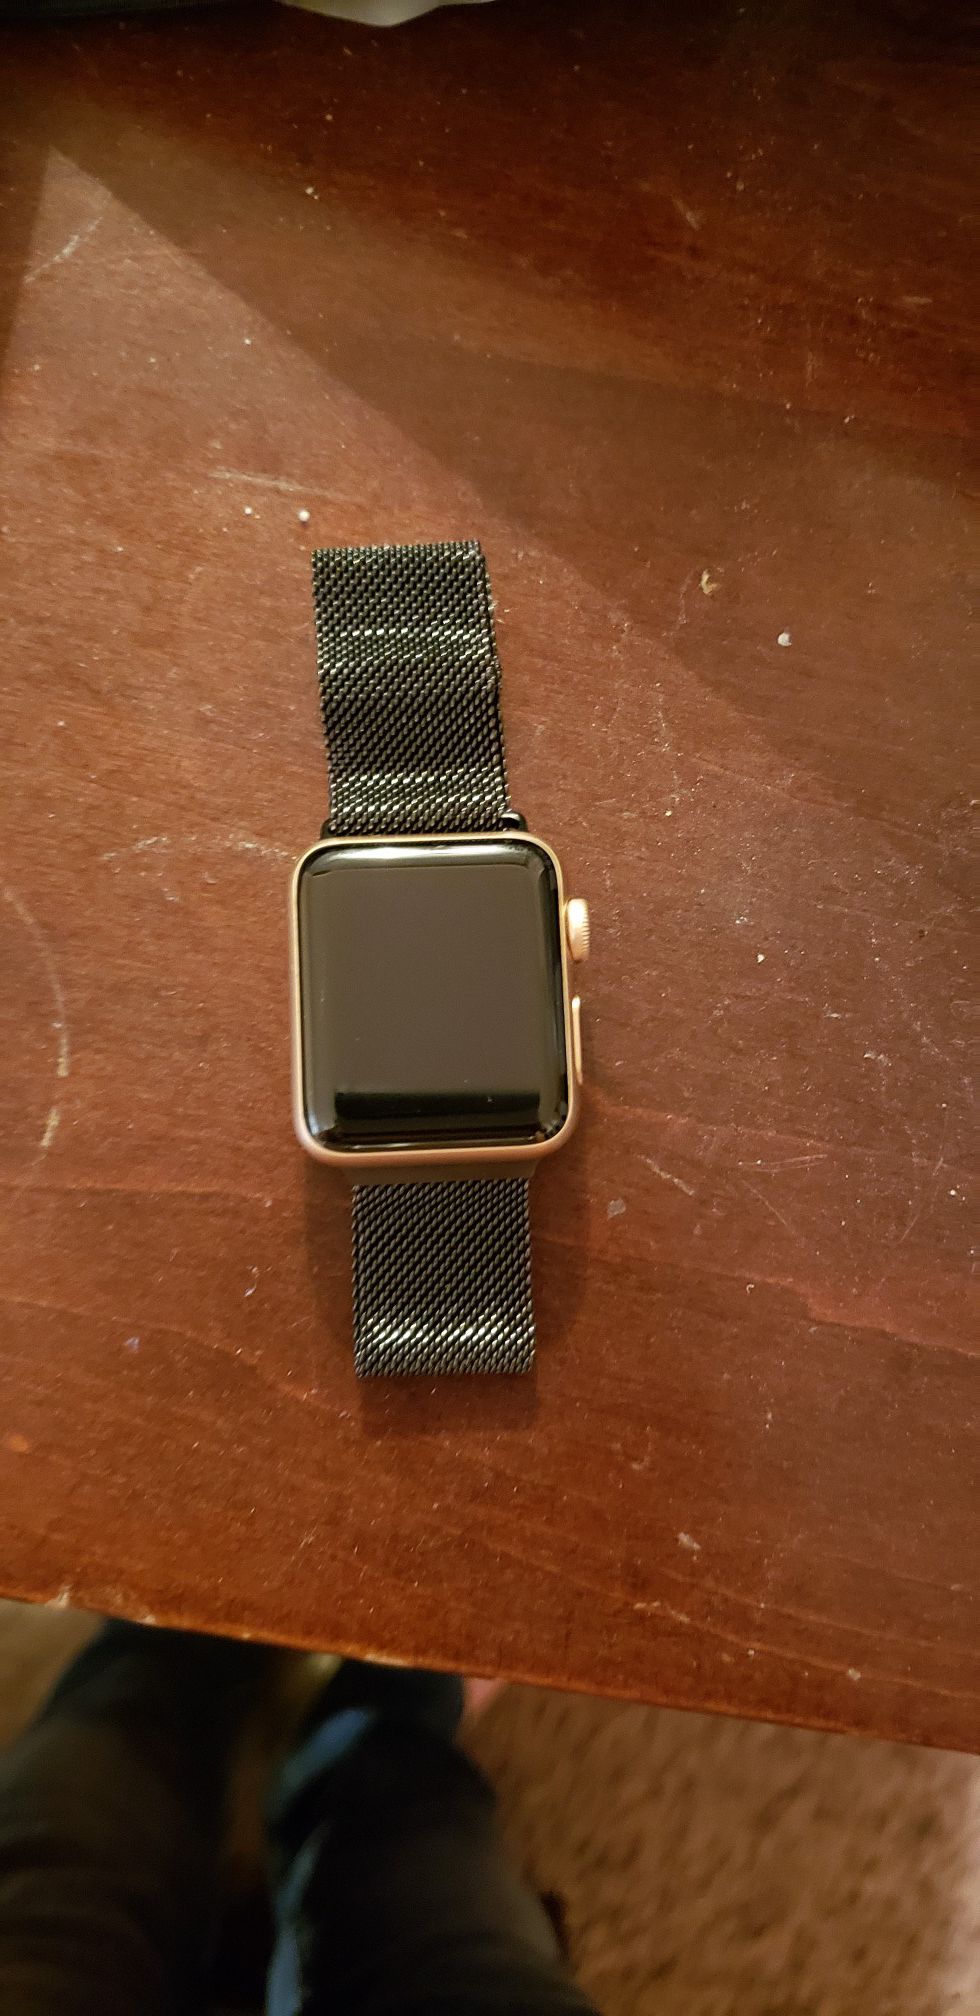 Apple watch 3, rose gold, lte, gps. With charger O.B.O